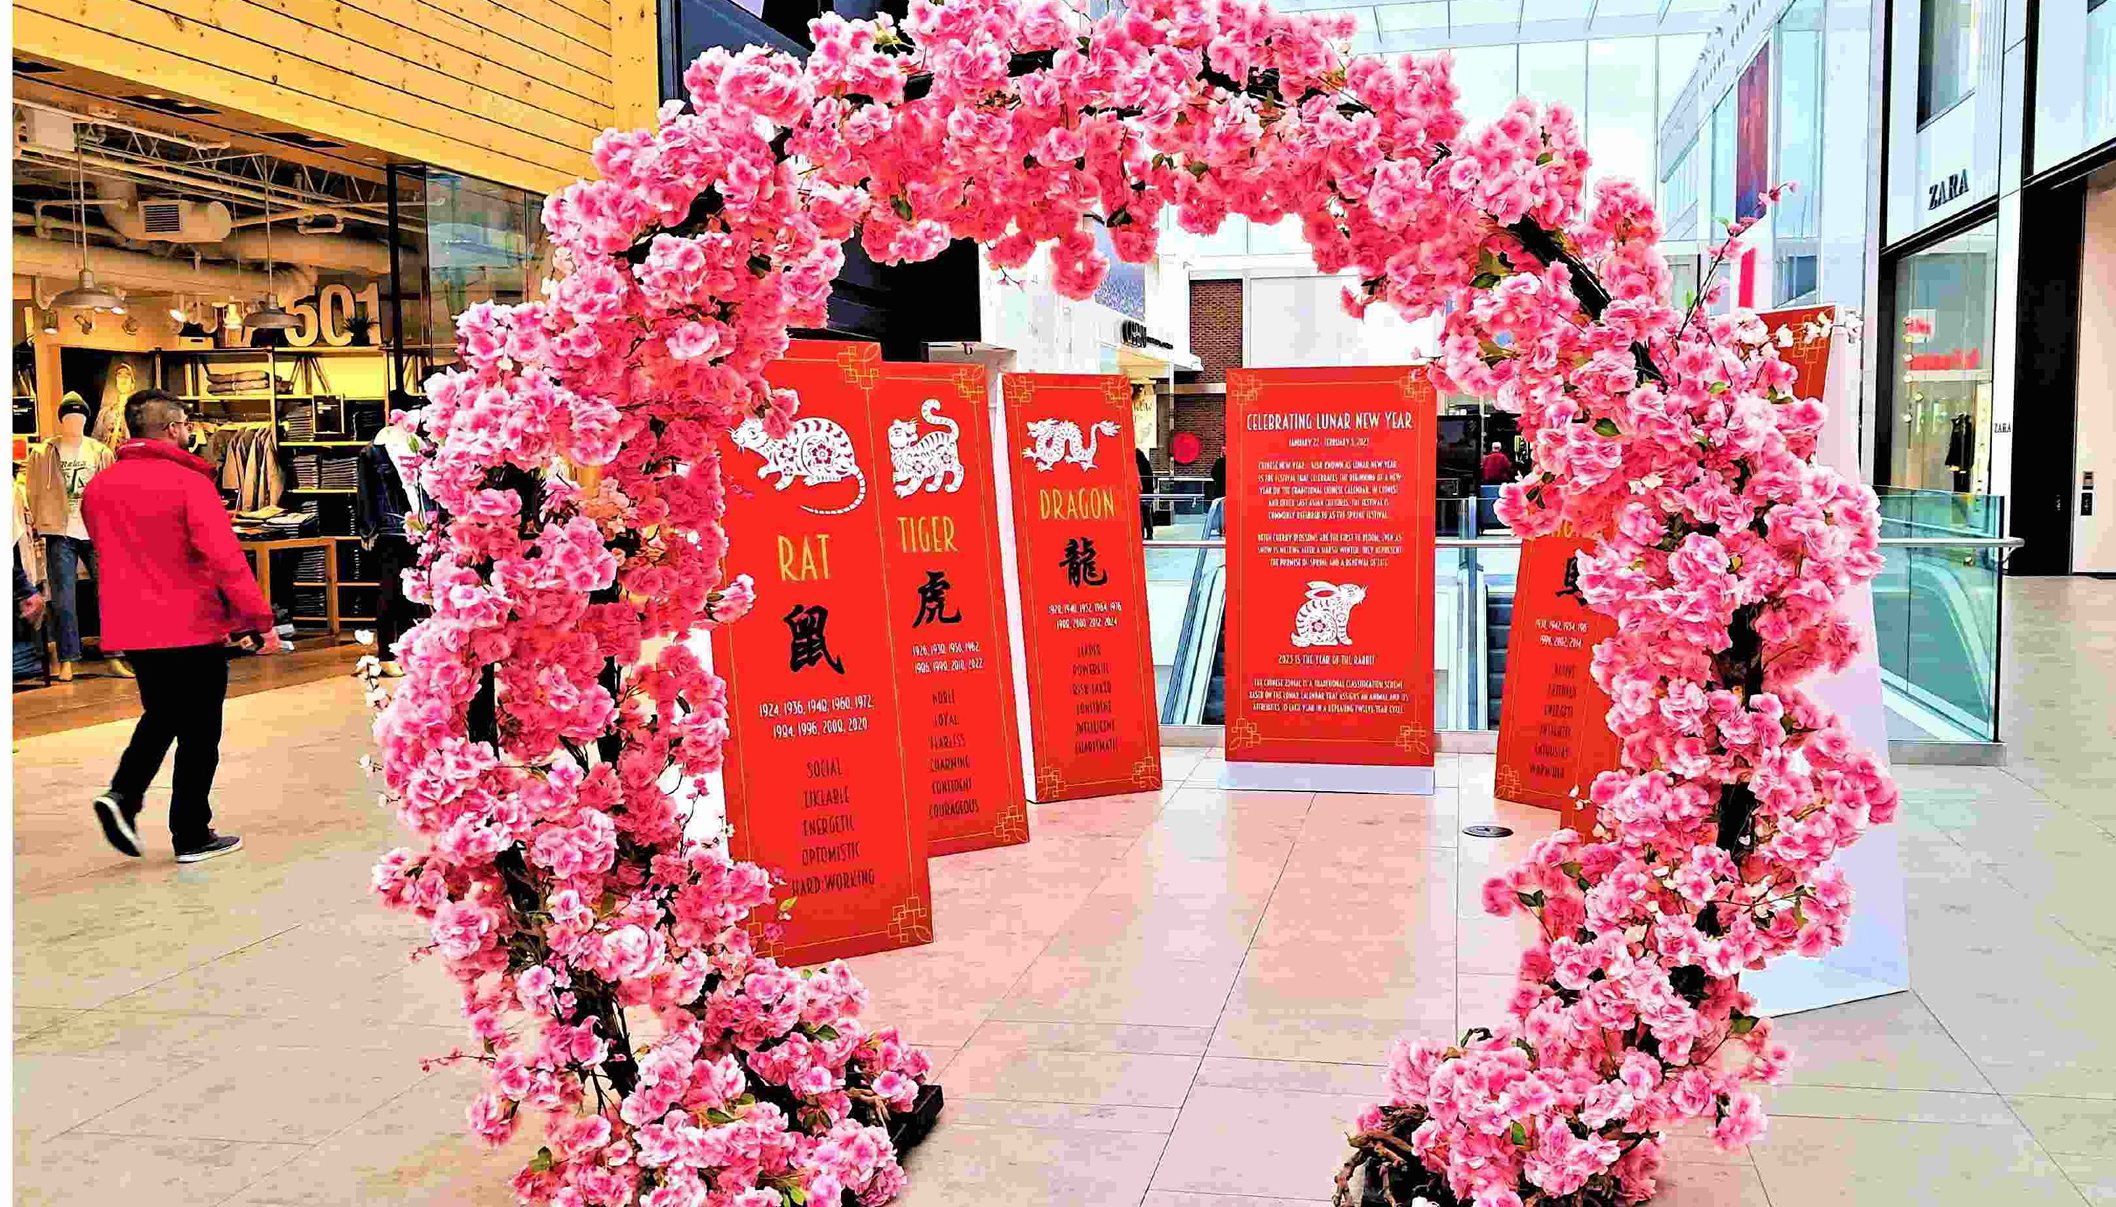 A person walks past the Lunar New Year exhibit at the Halifax Shopping Centre on Wednesday.